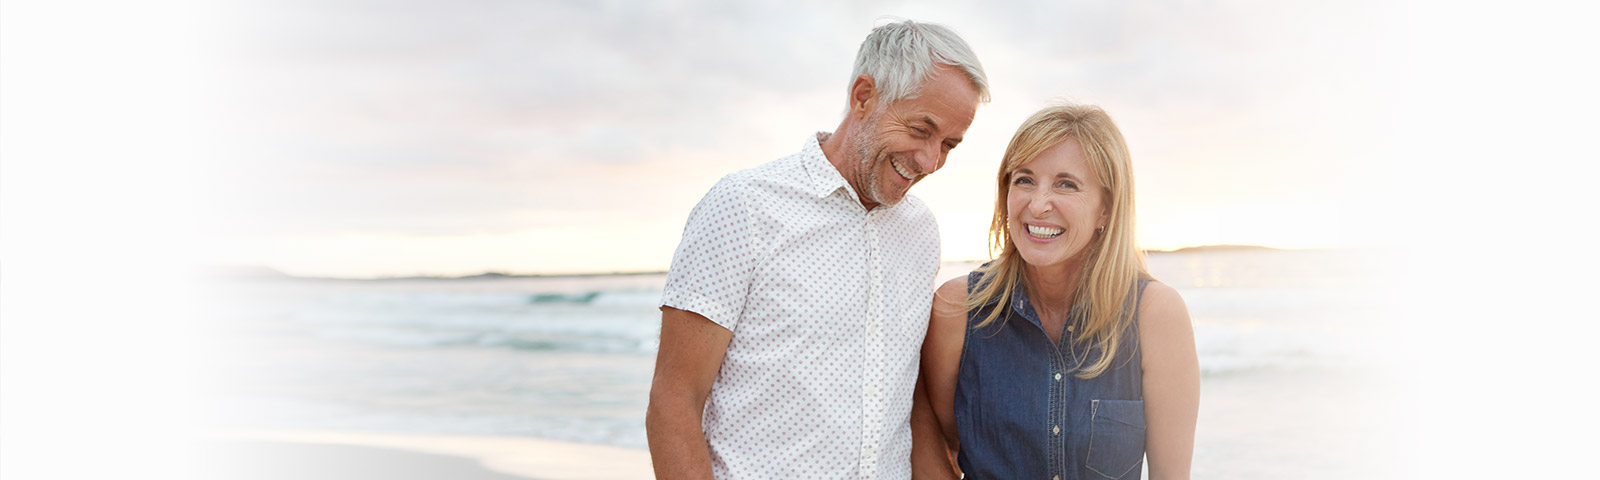 Older couple finsing happiness when dating after divorce